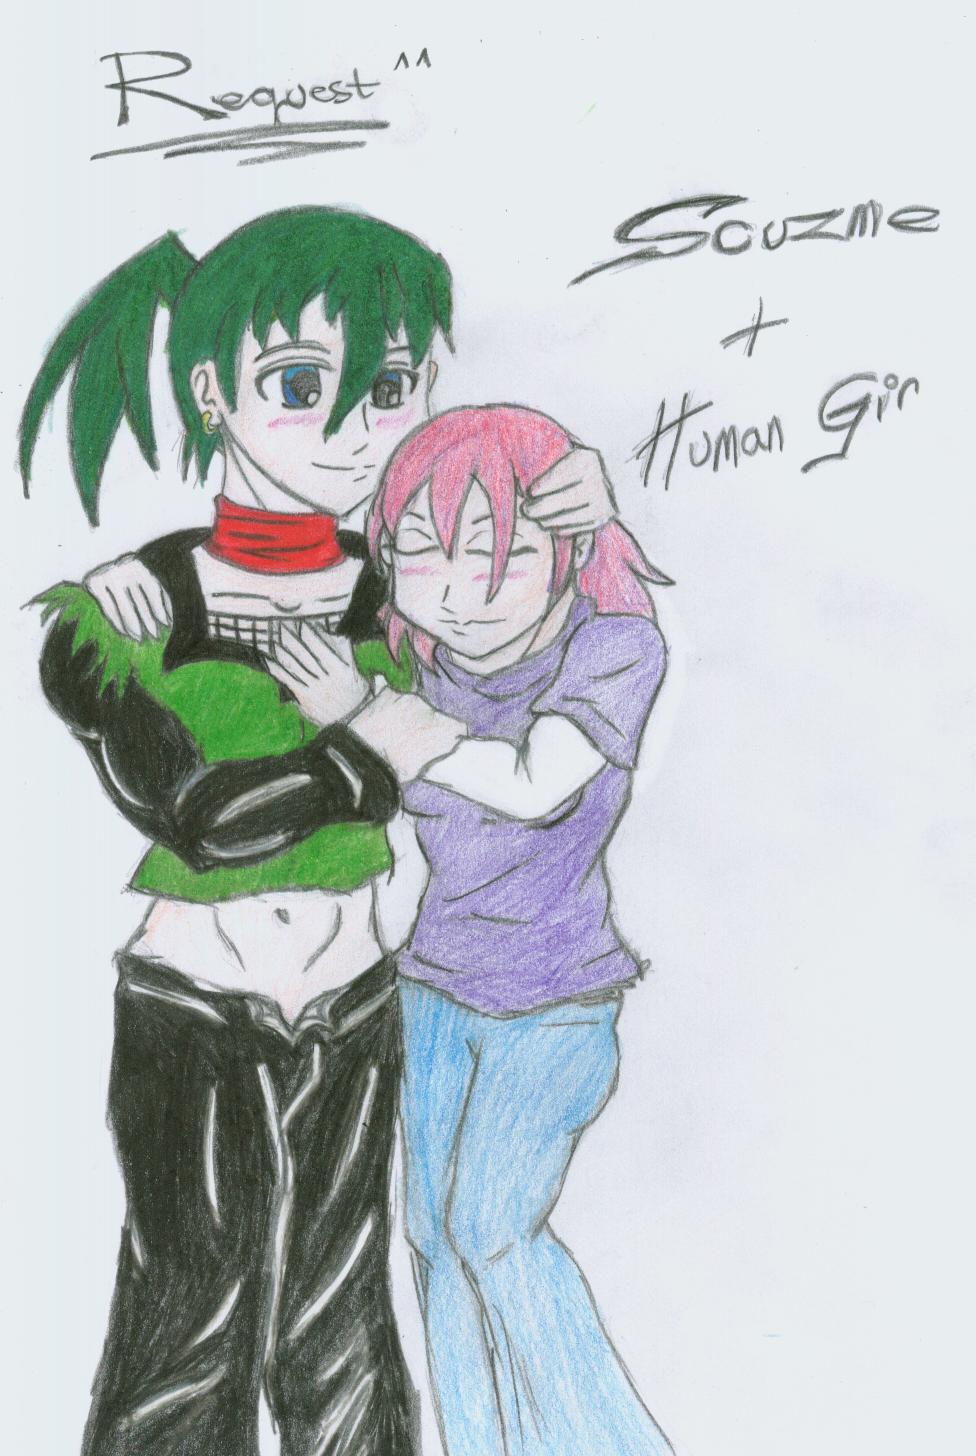 Request: Scuzme +  Sexy Human Gir by Frost_Dragon